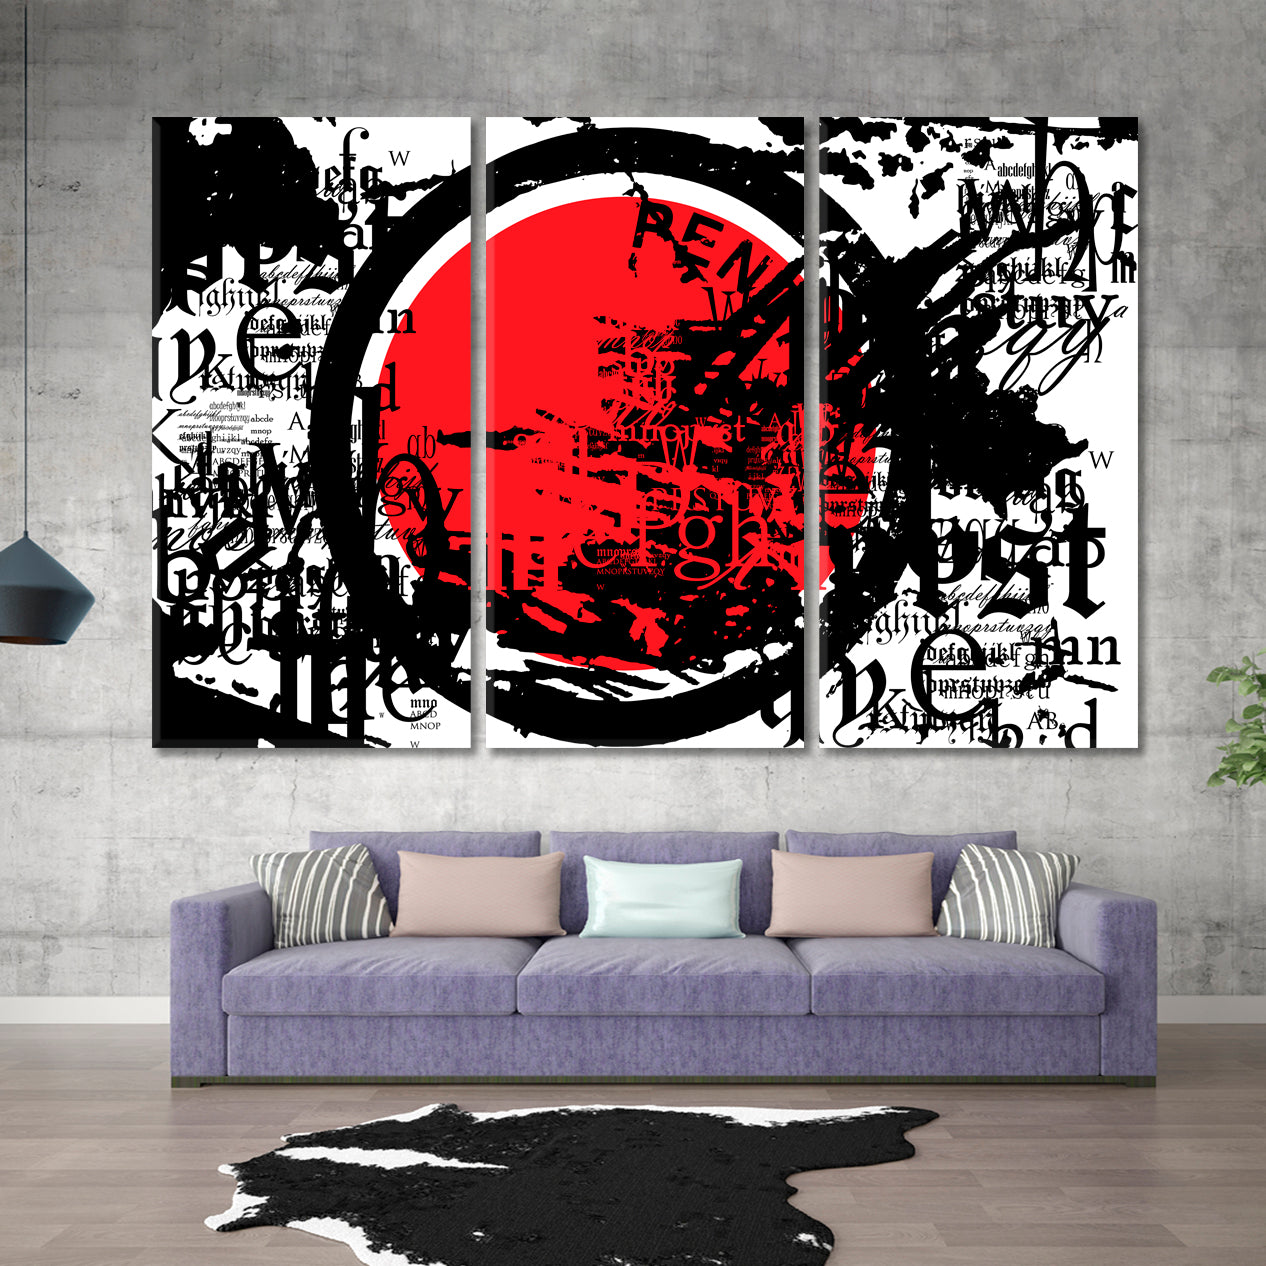 GRUNGE Modern Abstract Black Red White Asian Style Canvas Print Wall Art Artesty 3 panels 36" x 24" 